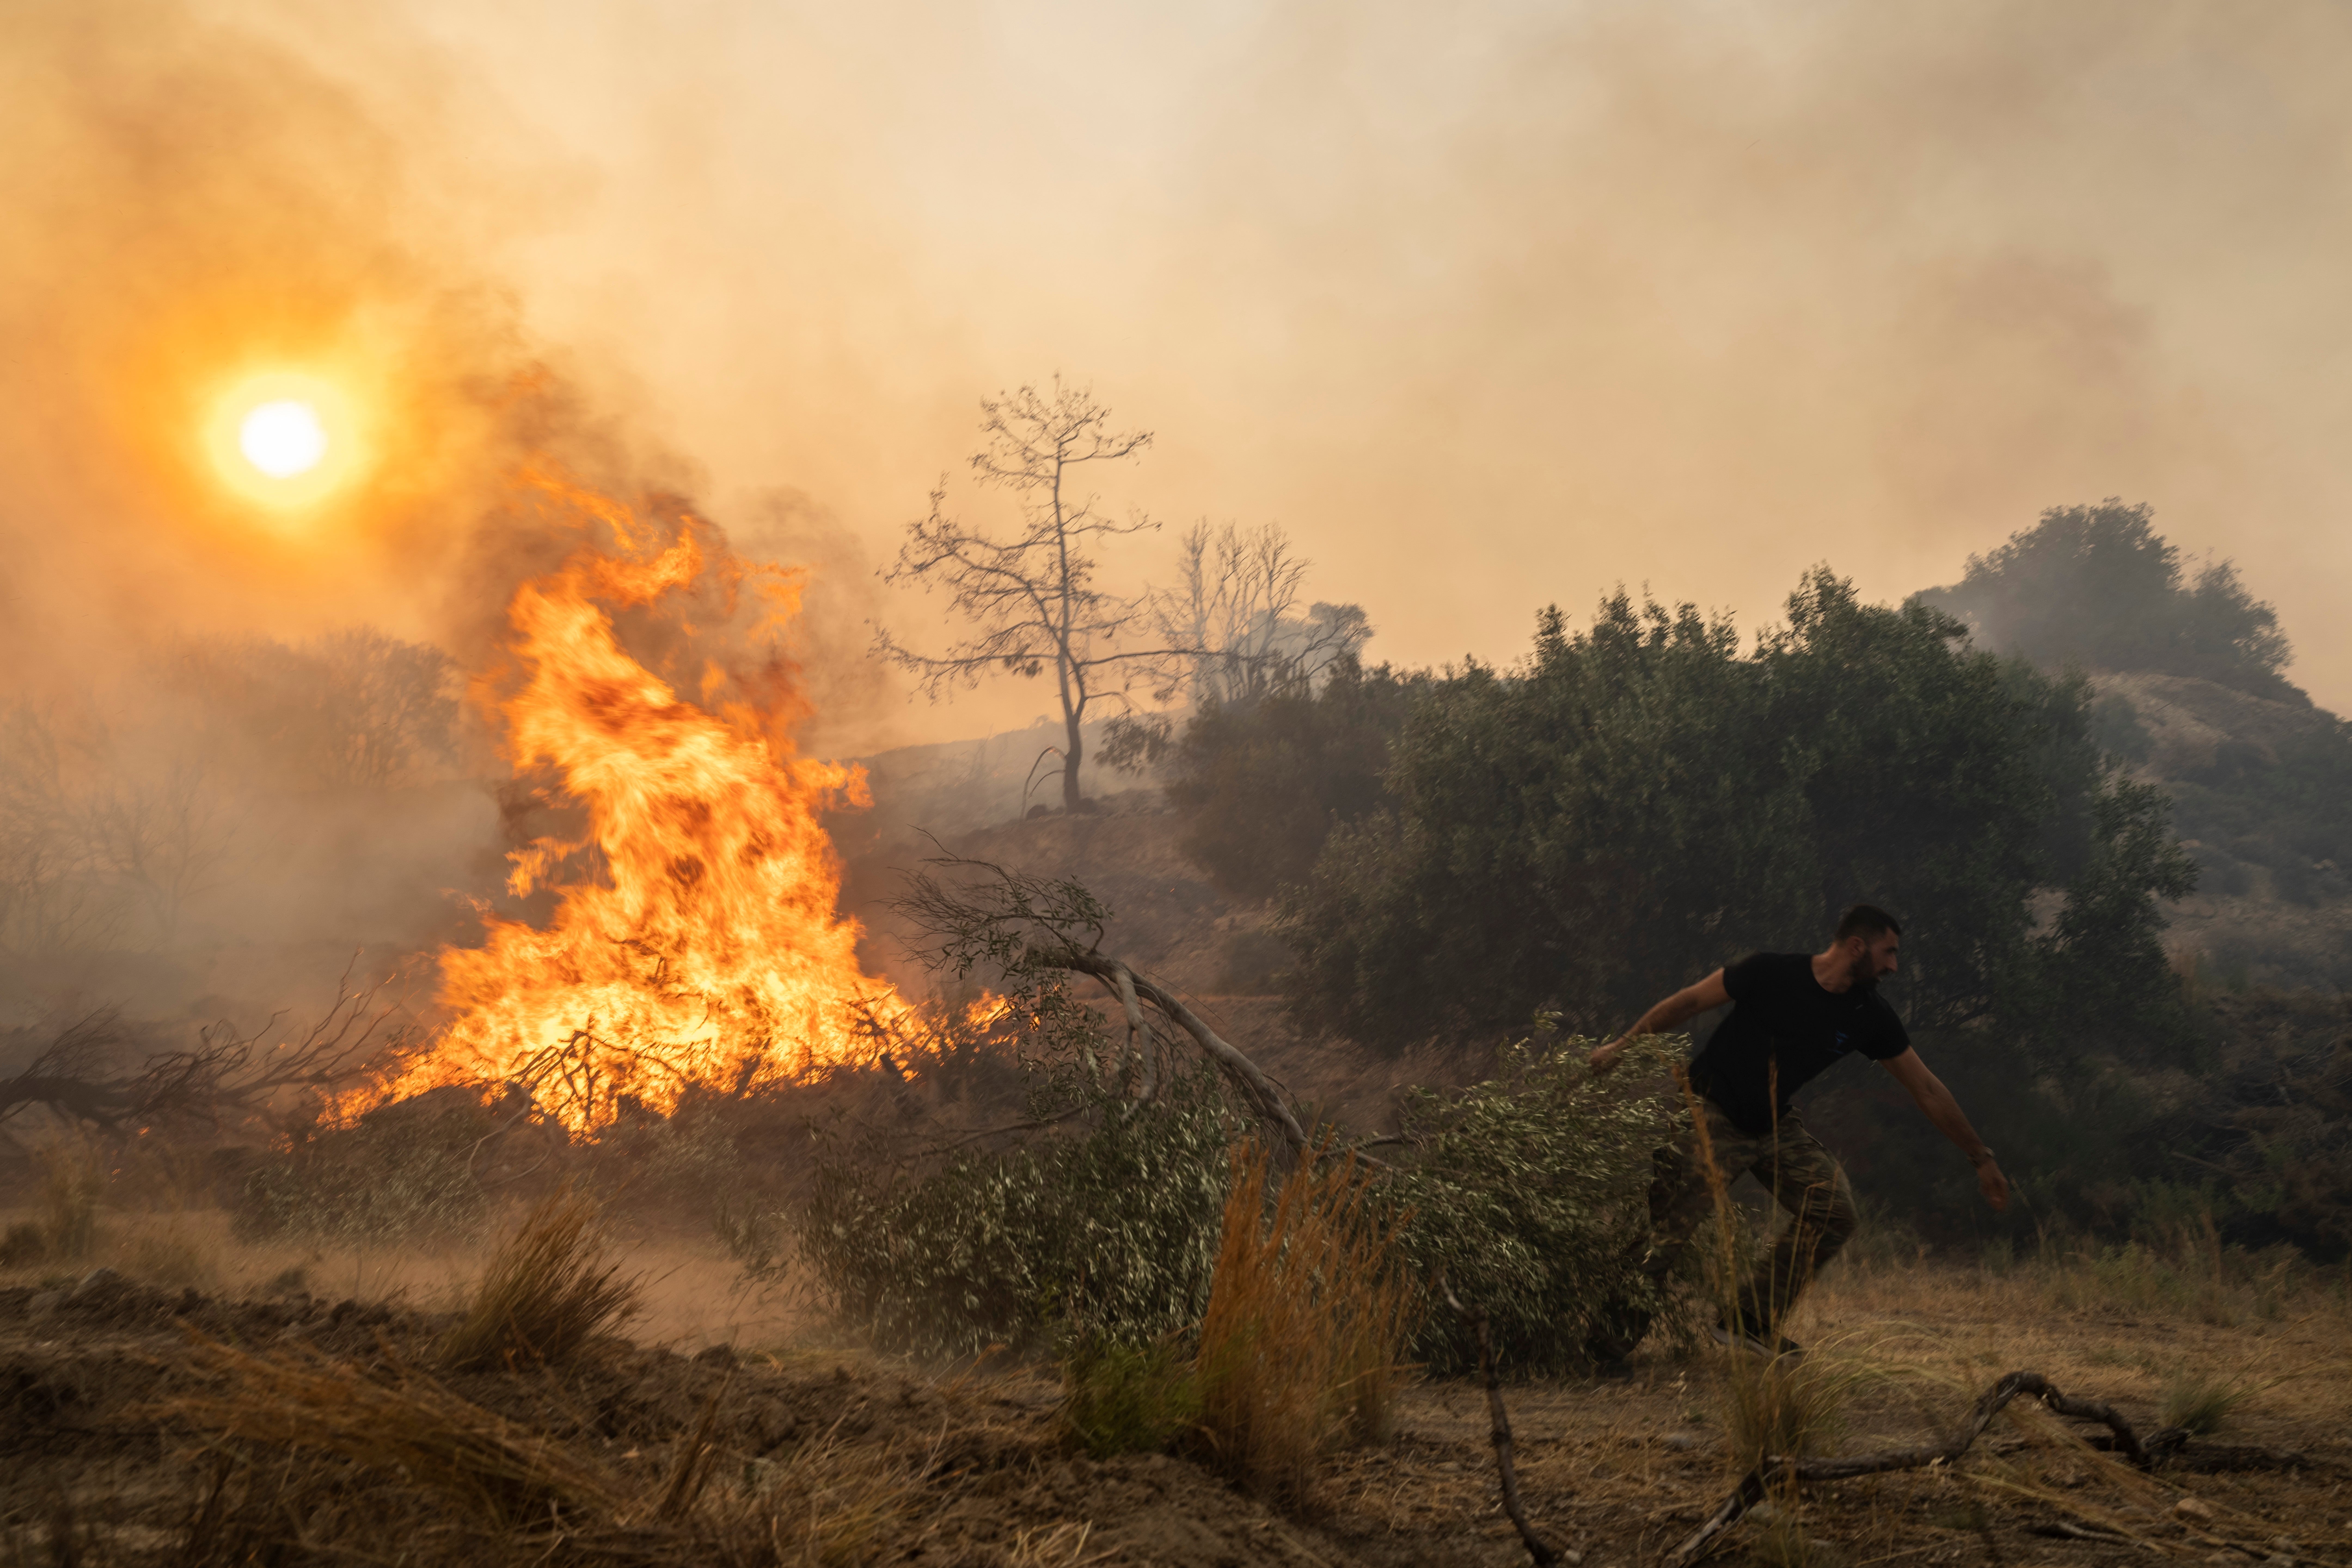 Wildfires are ravaging Rhodes, pictures, as well as Corfu, Evia, and the Peloponnese region